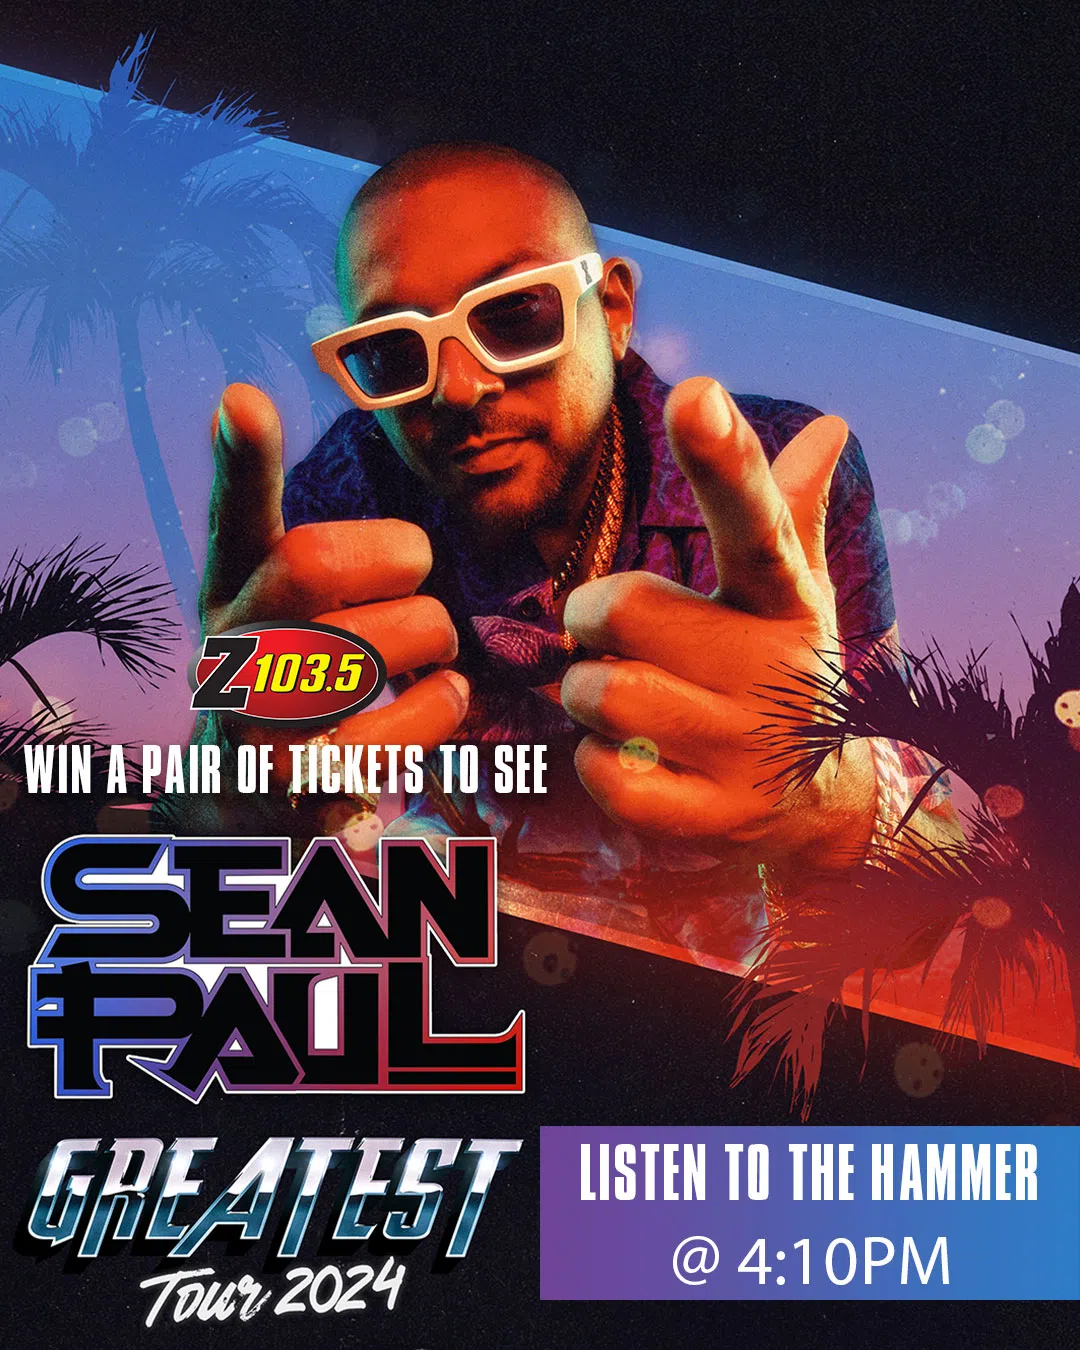 Feature: https://z1035.com/win/win-tickets-to-see-sean-paul-greatest-tour/